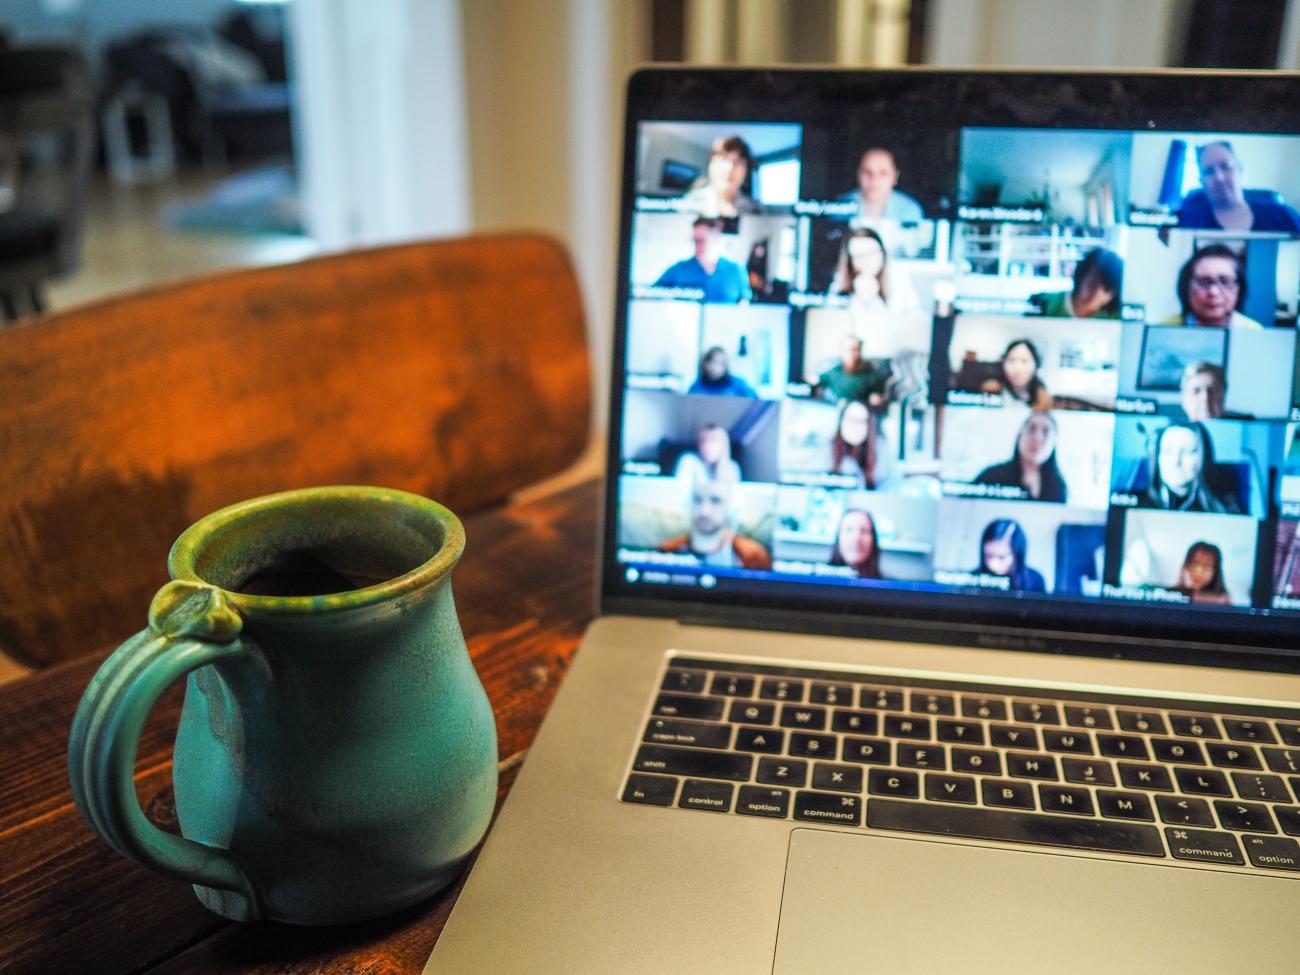 a laptop and mug on a living room desk from the point of view of someone on a video call. Various faces show on screen in a video conference layout.